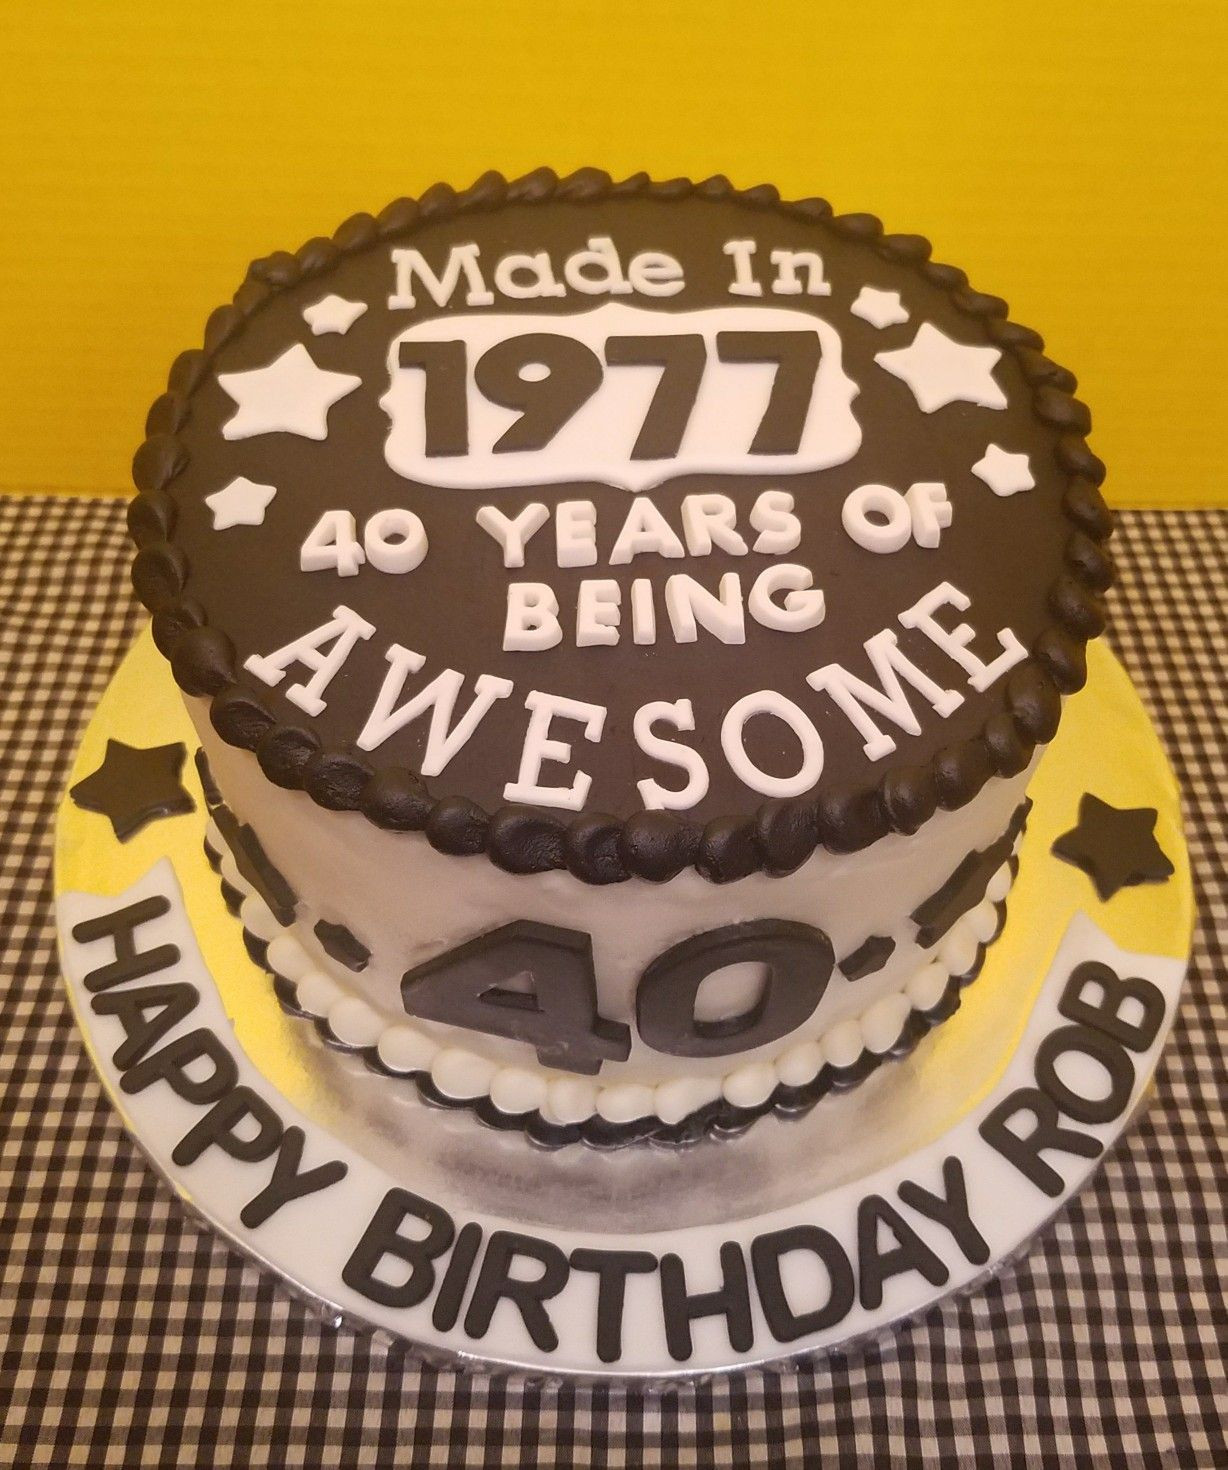 40th Birthday Cake Ideas For Him
 40th Birthday Cake All buttercream with fondant